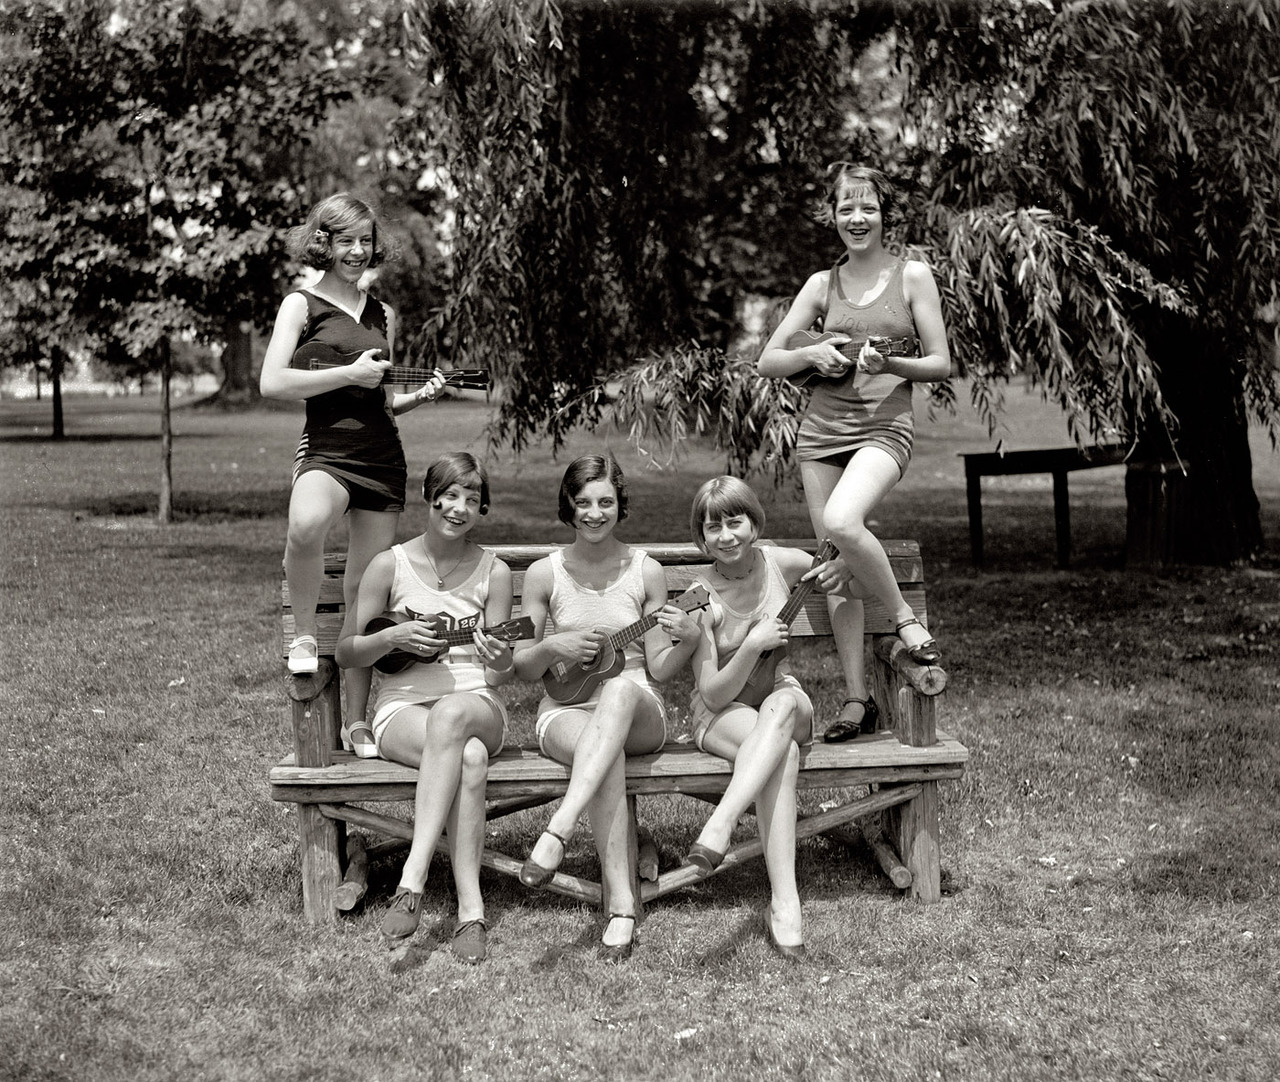 silentcuriosity:   July 9, 1926. Washington, D.C. “Girls in bathing suits with